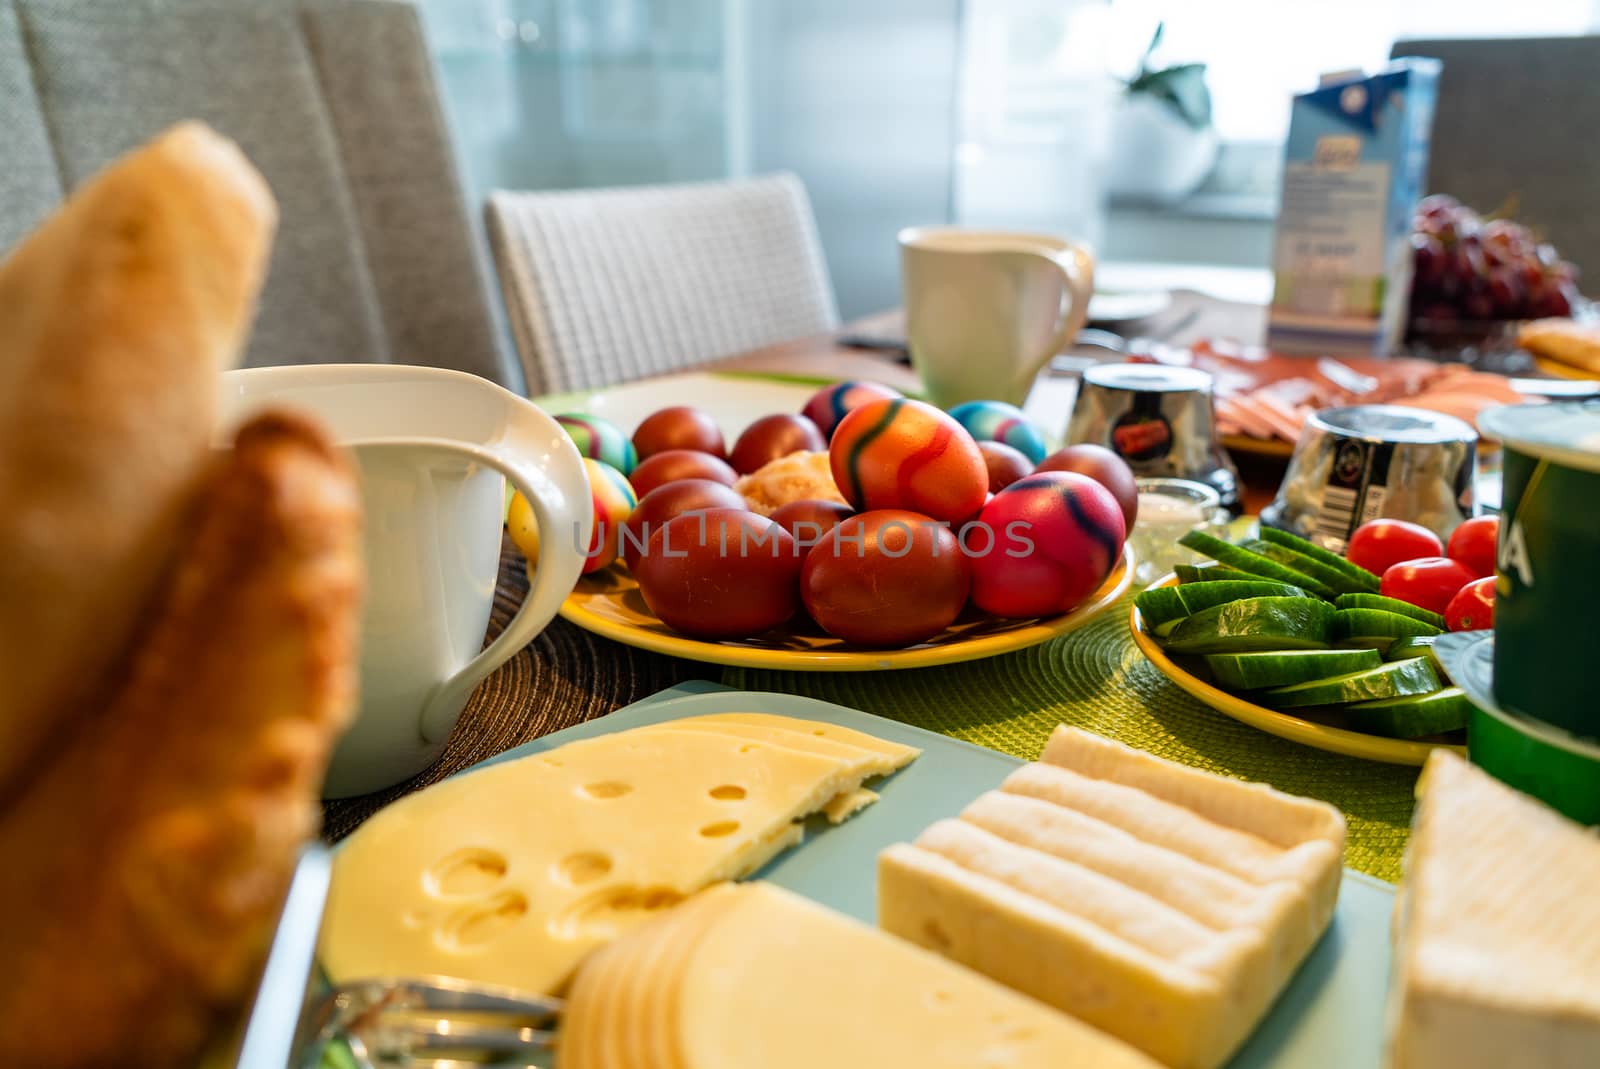 Colored eggs as a traditional symbol of Easter celebration on a breakfast table in Germany together with other toppings.